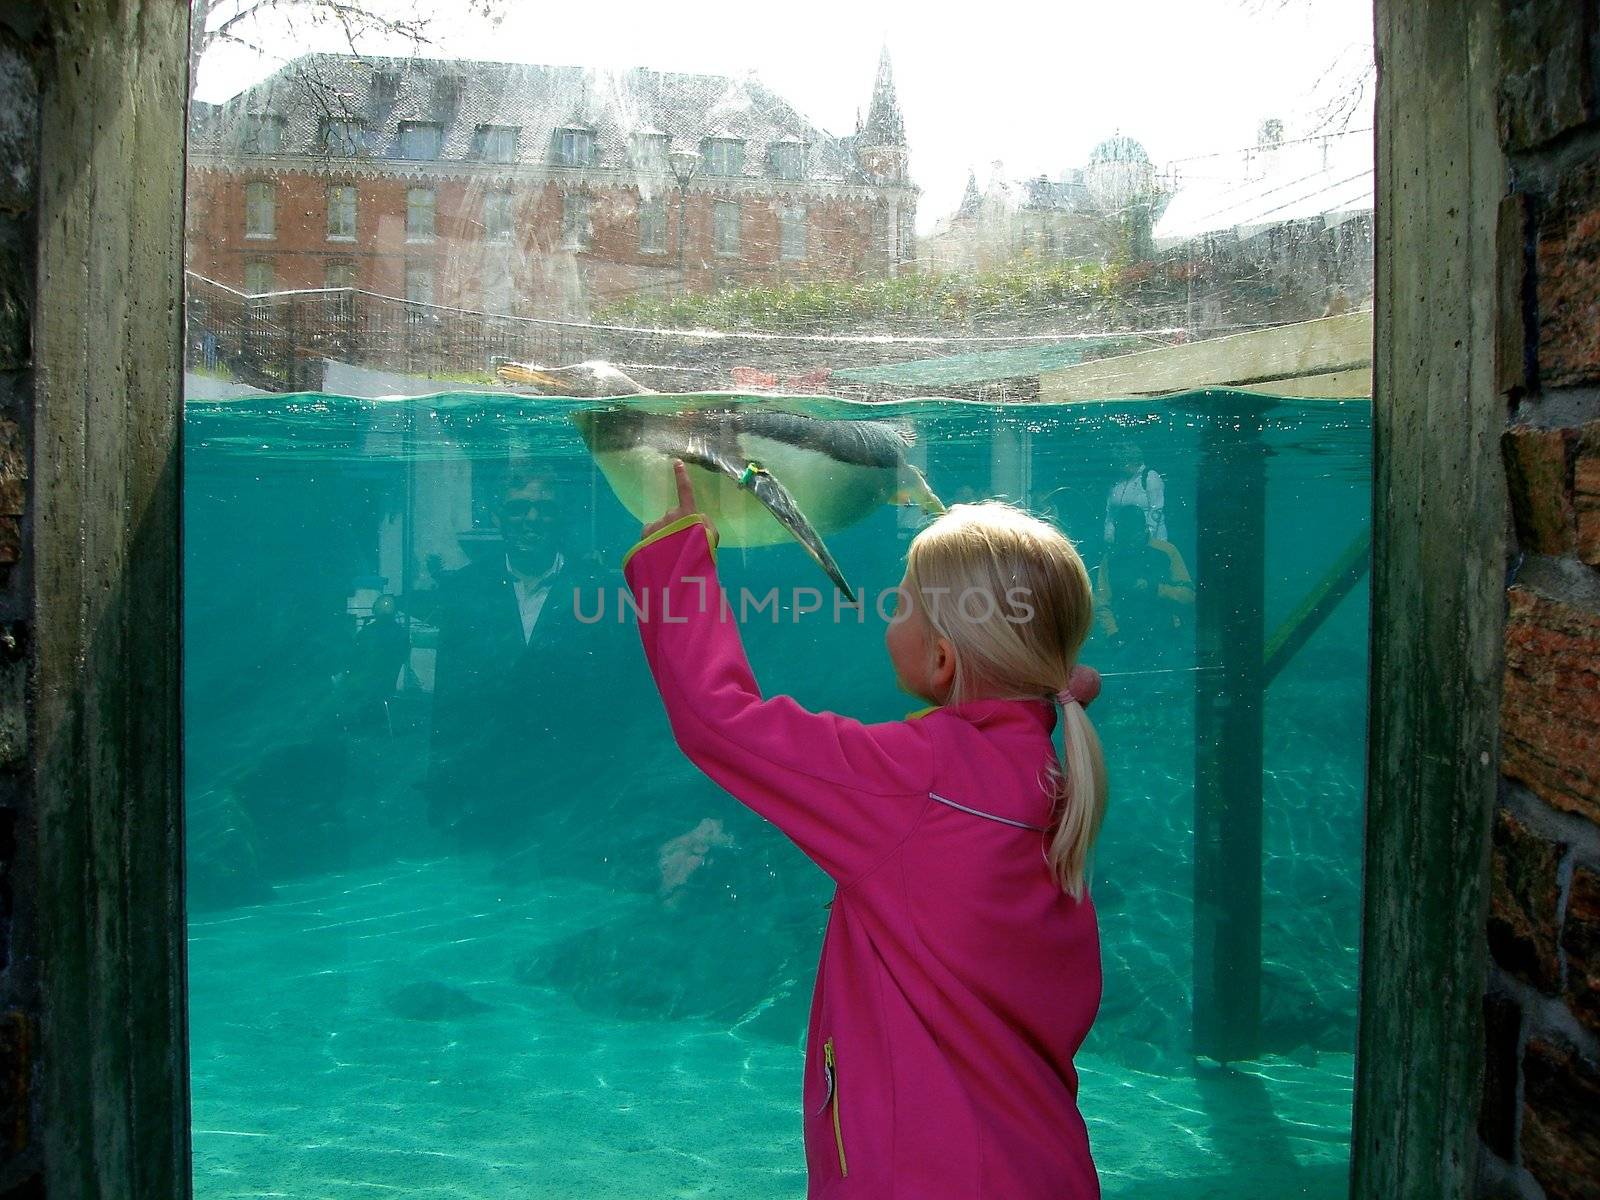 little girl in aquarium, Norway. Please note: No negative use allowed.